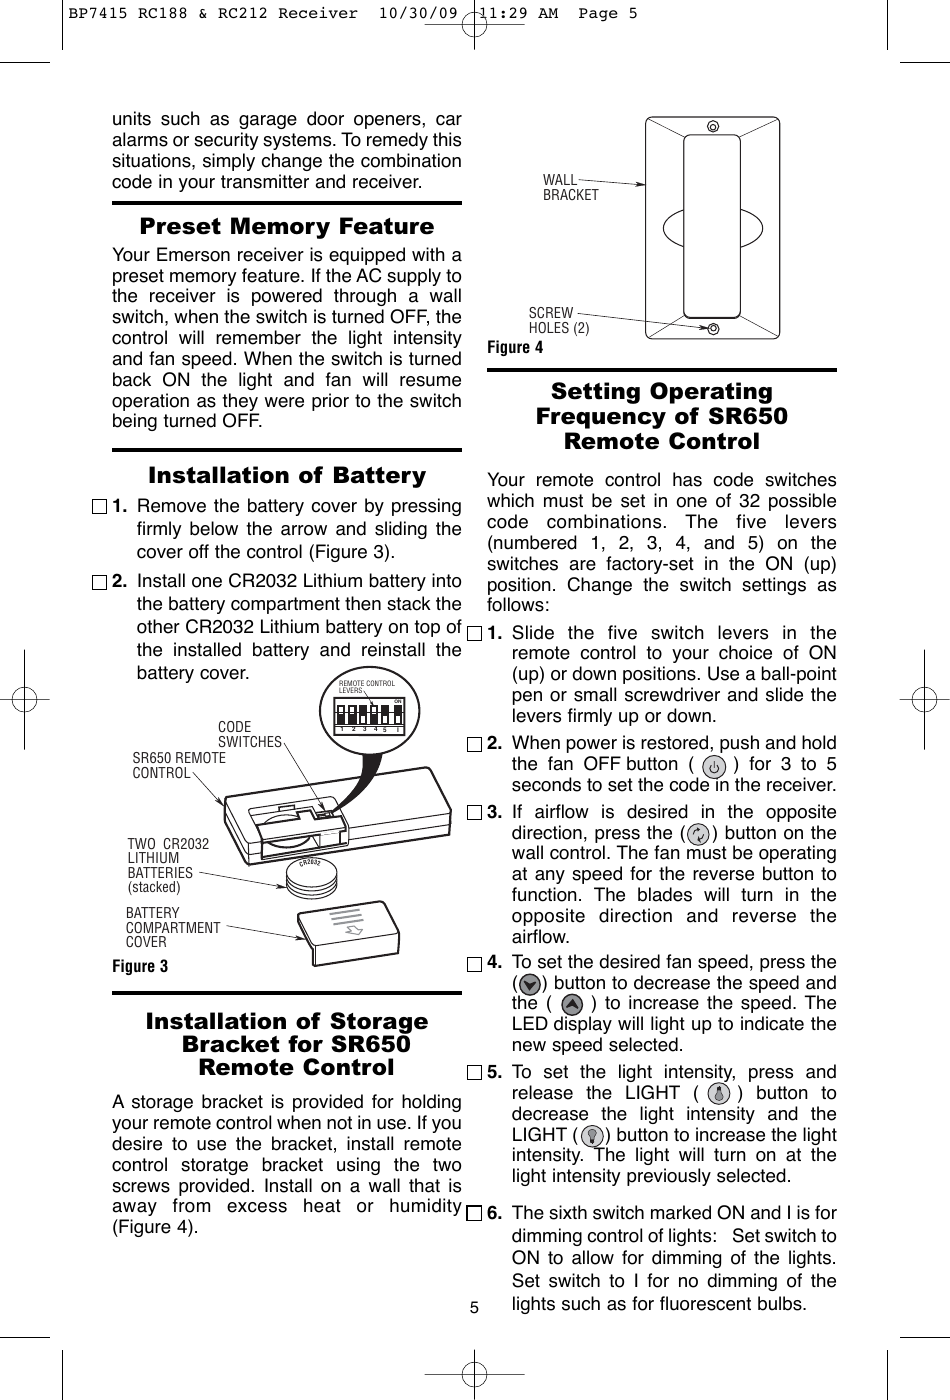 Page 5 of 12 - Emerson Emerson-Rc188-Owners-Manual- BP7415 RC188 & RC212 Receiver  Emerson-rc188-owners-manual